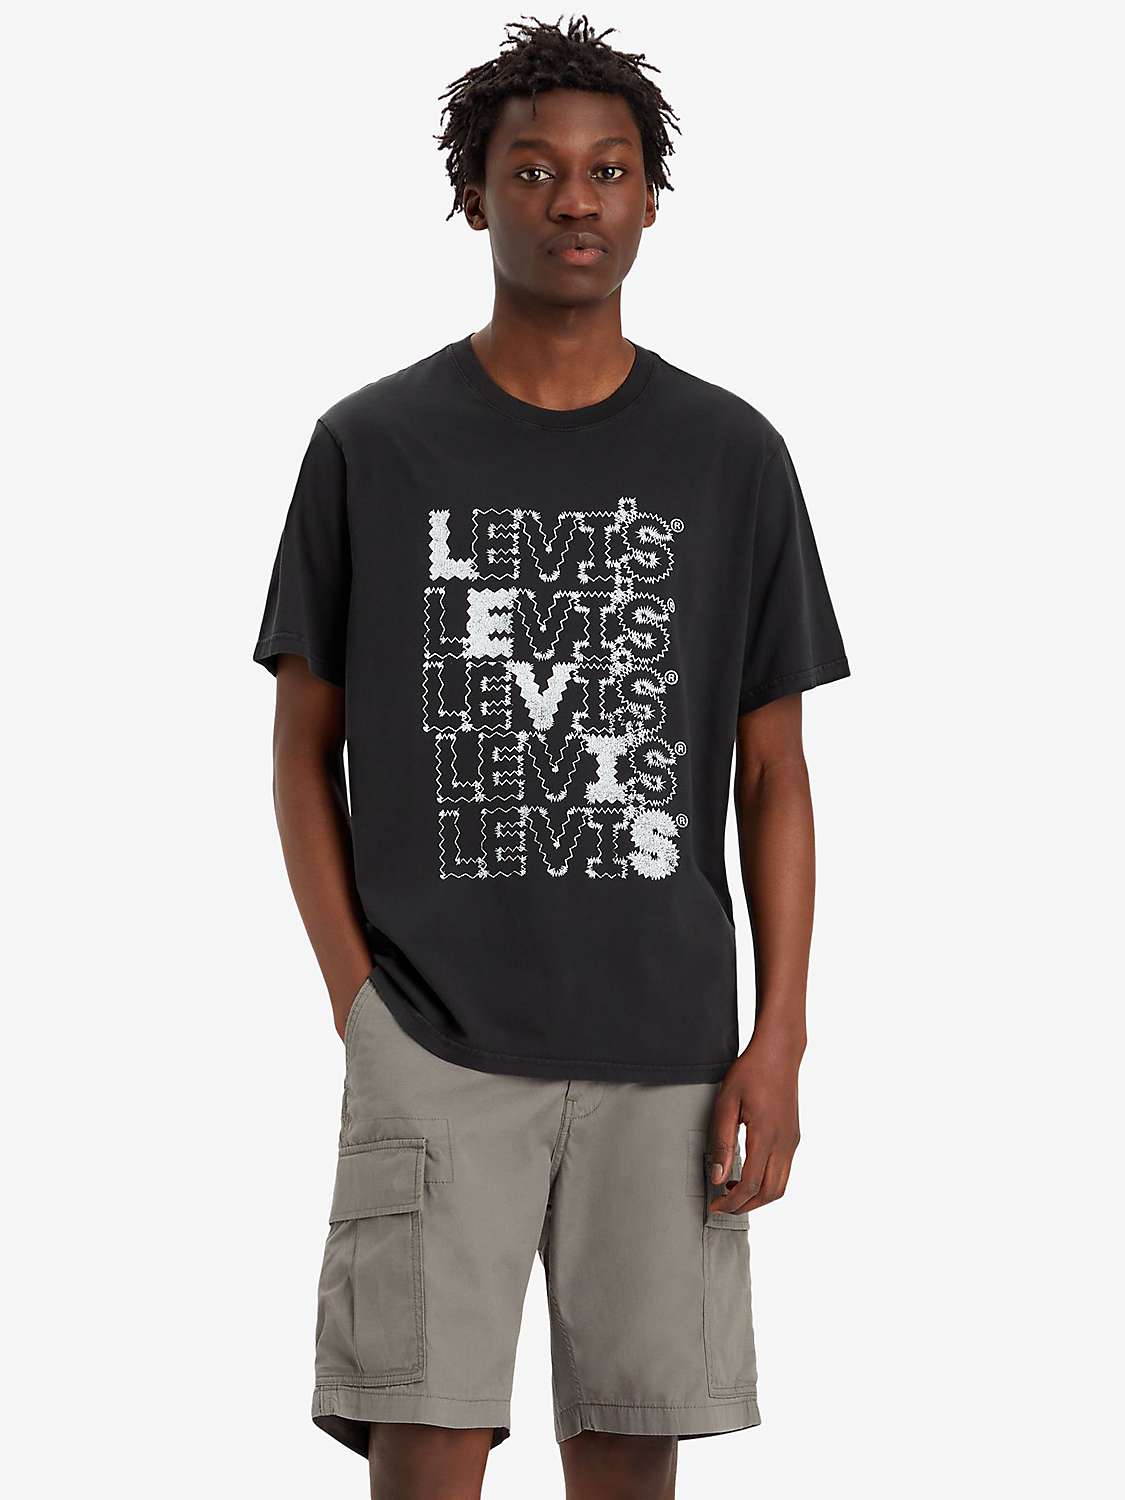 Buy Levi's Short Sleeve Relaxed Fit T-Shirt, Black/Multi Online at johnlewis.com